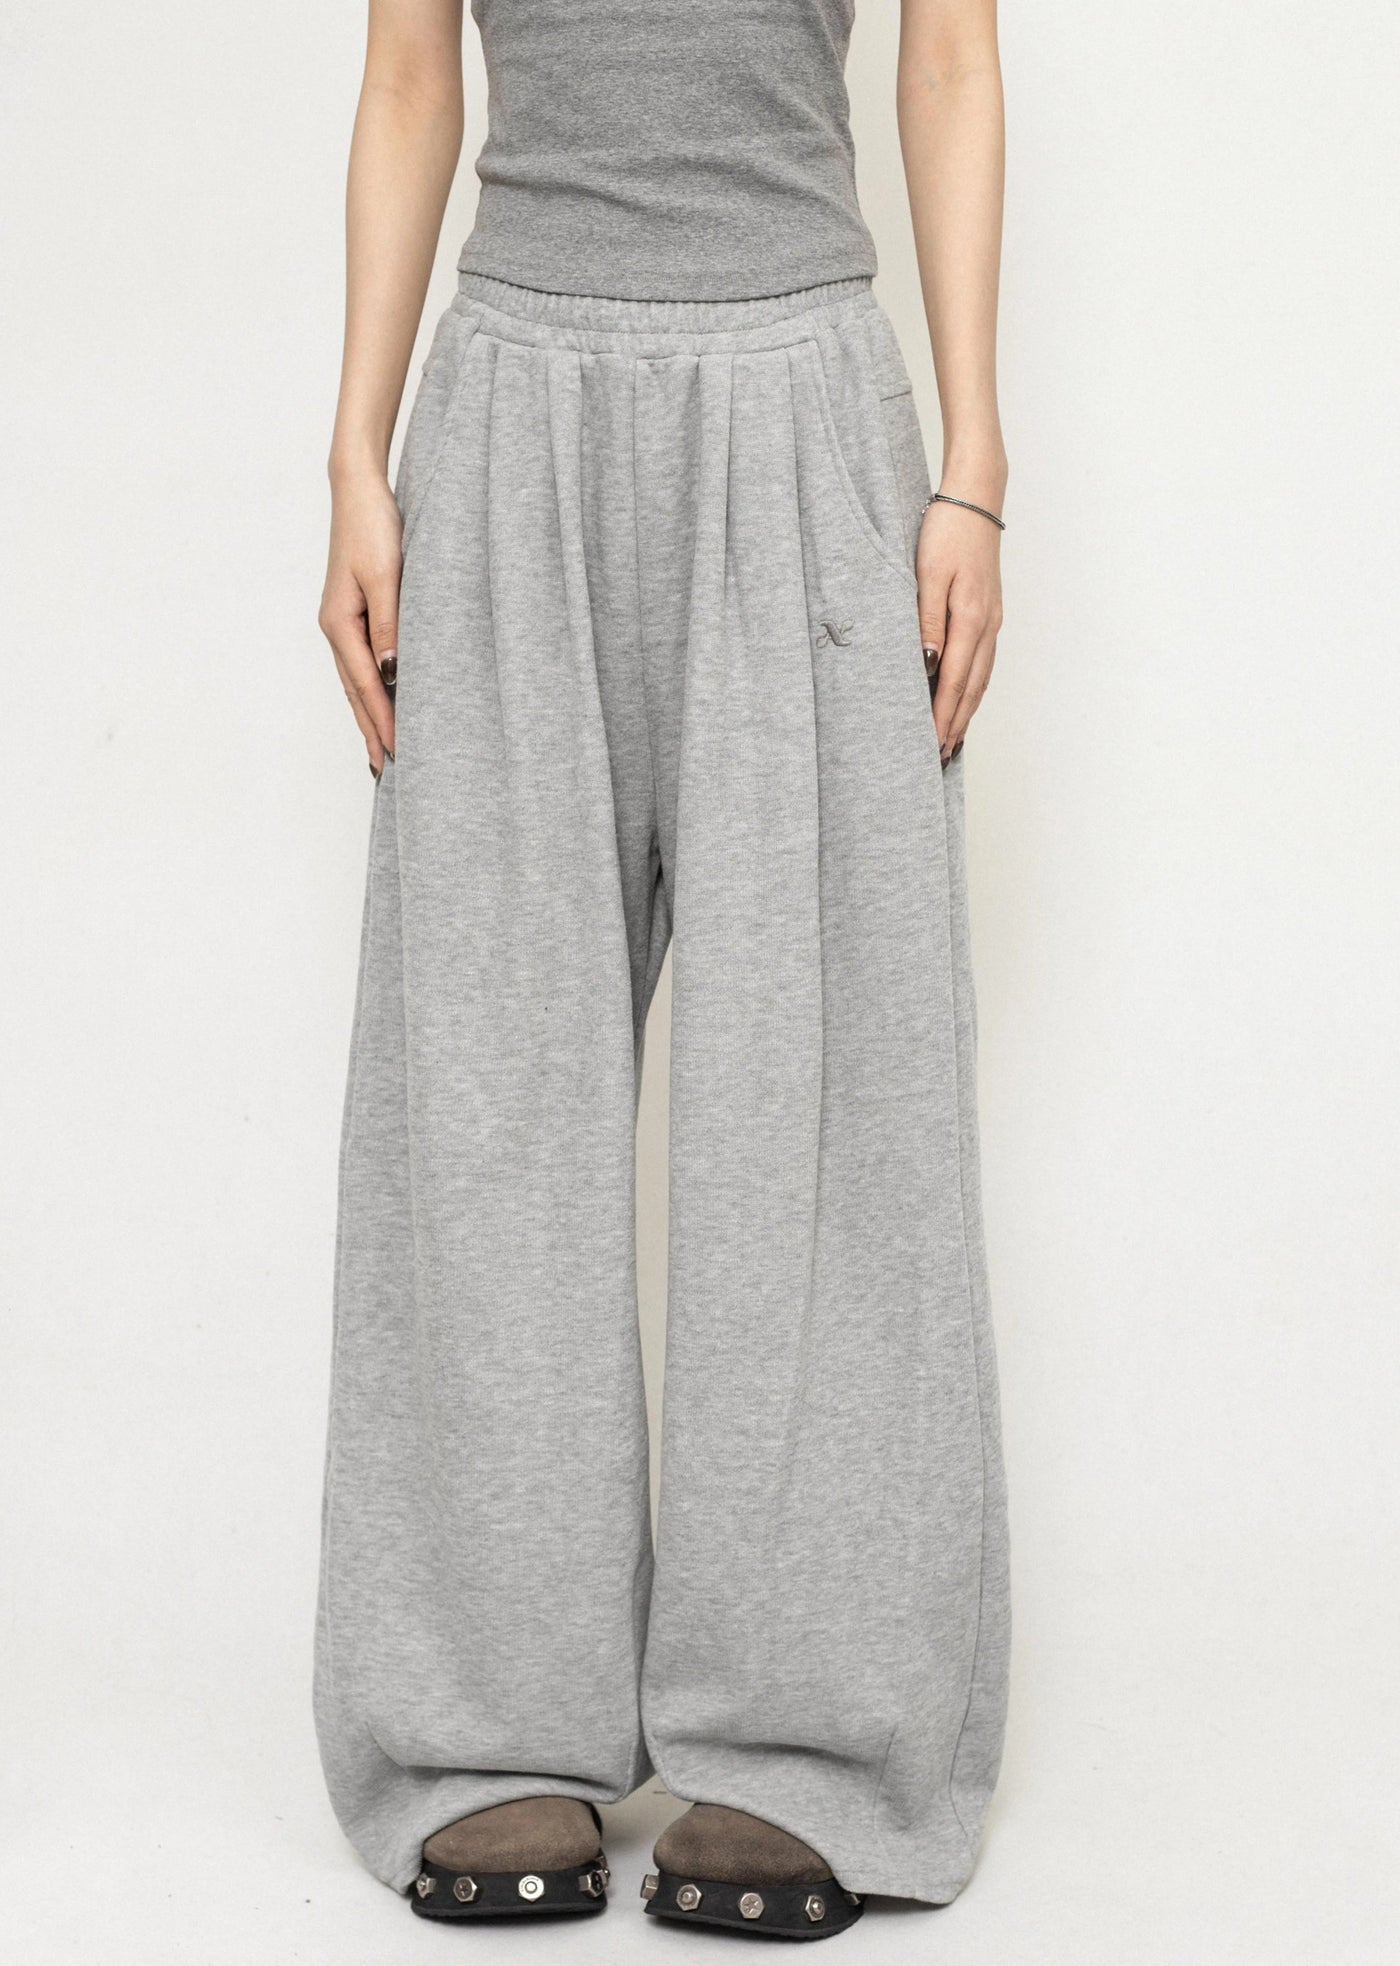 【ZERO STORE】Wide silhouette loose style simple sweatpants  ZS0026